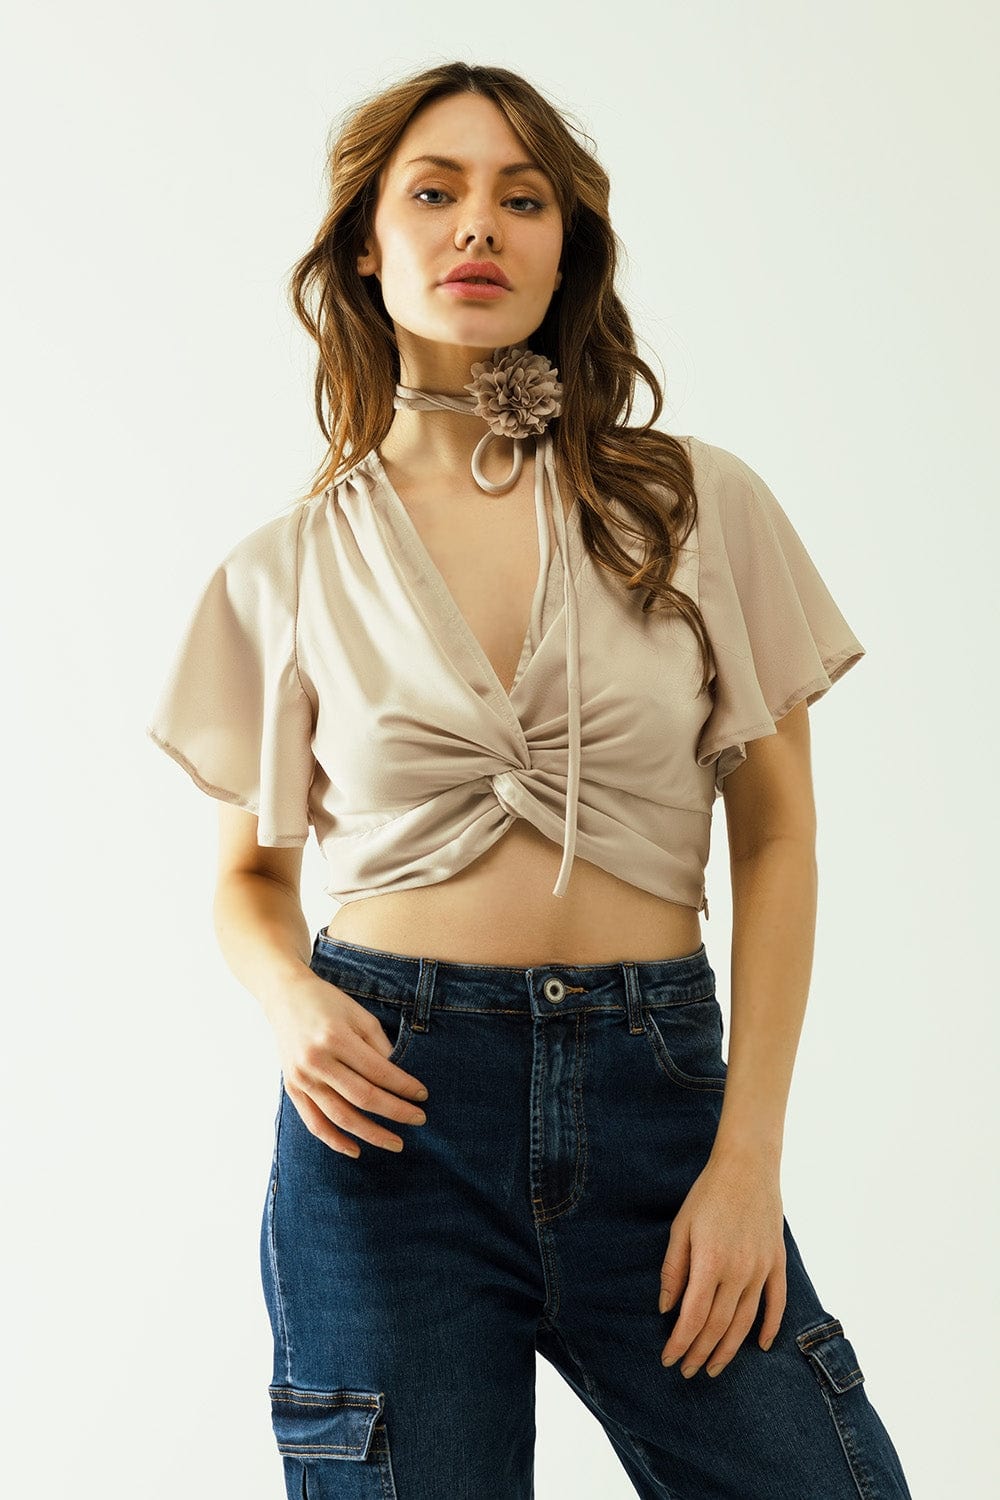 Q2 Women's Blouse Beige V-Neck Crop Top With Short Sleeves And A Flower Detail On The Neck